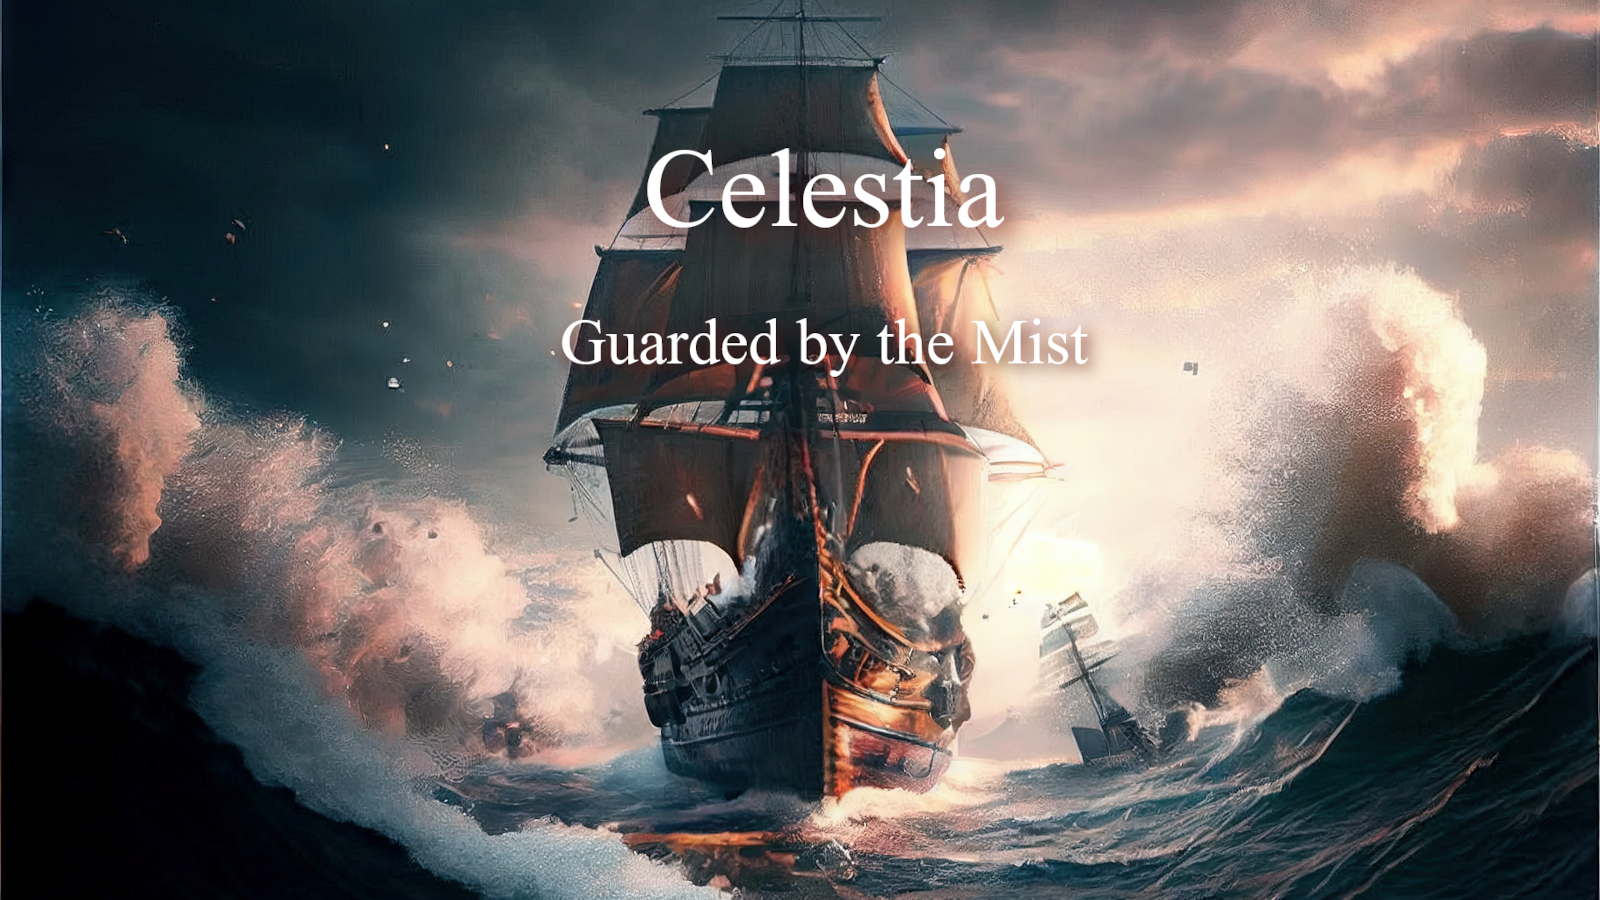 Celestia - Guarded by the Mist